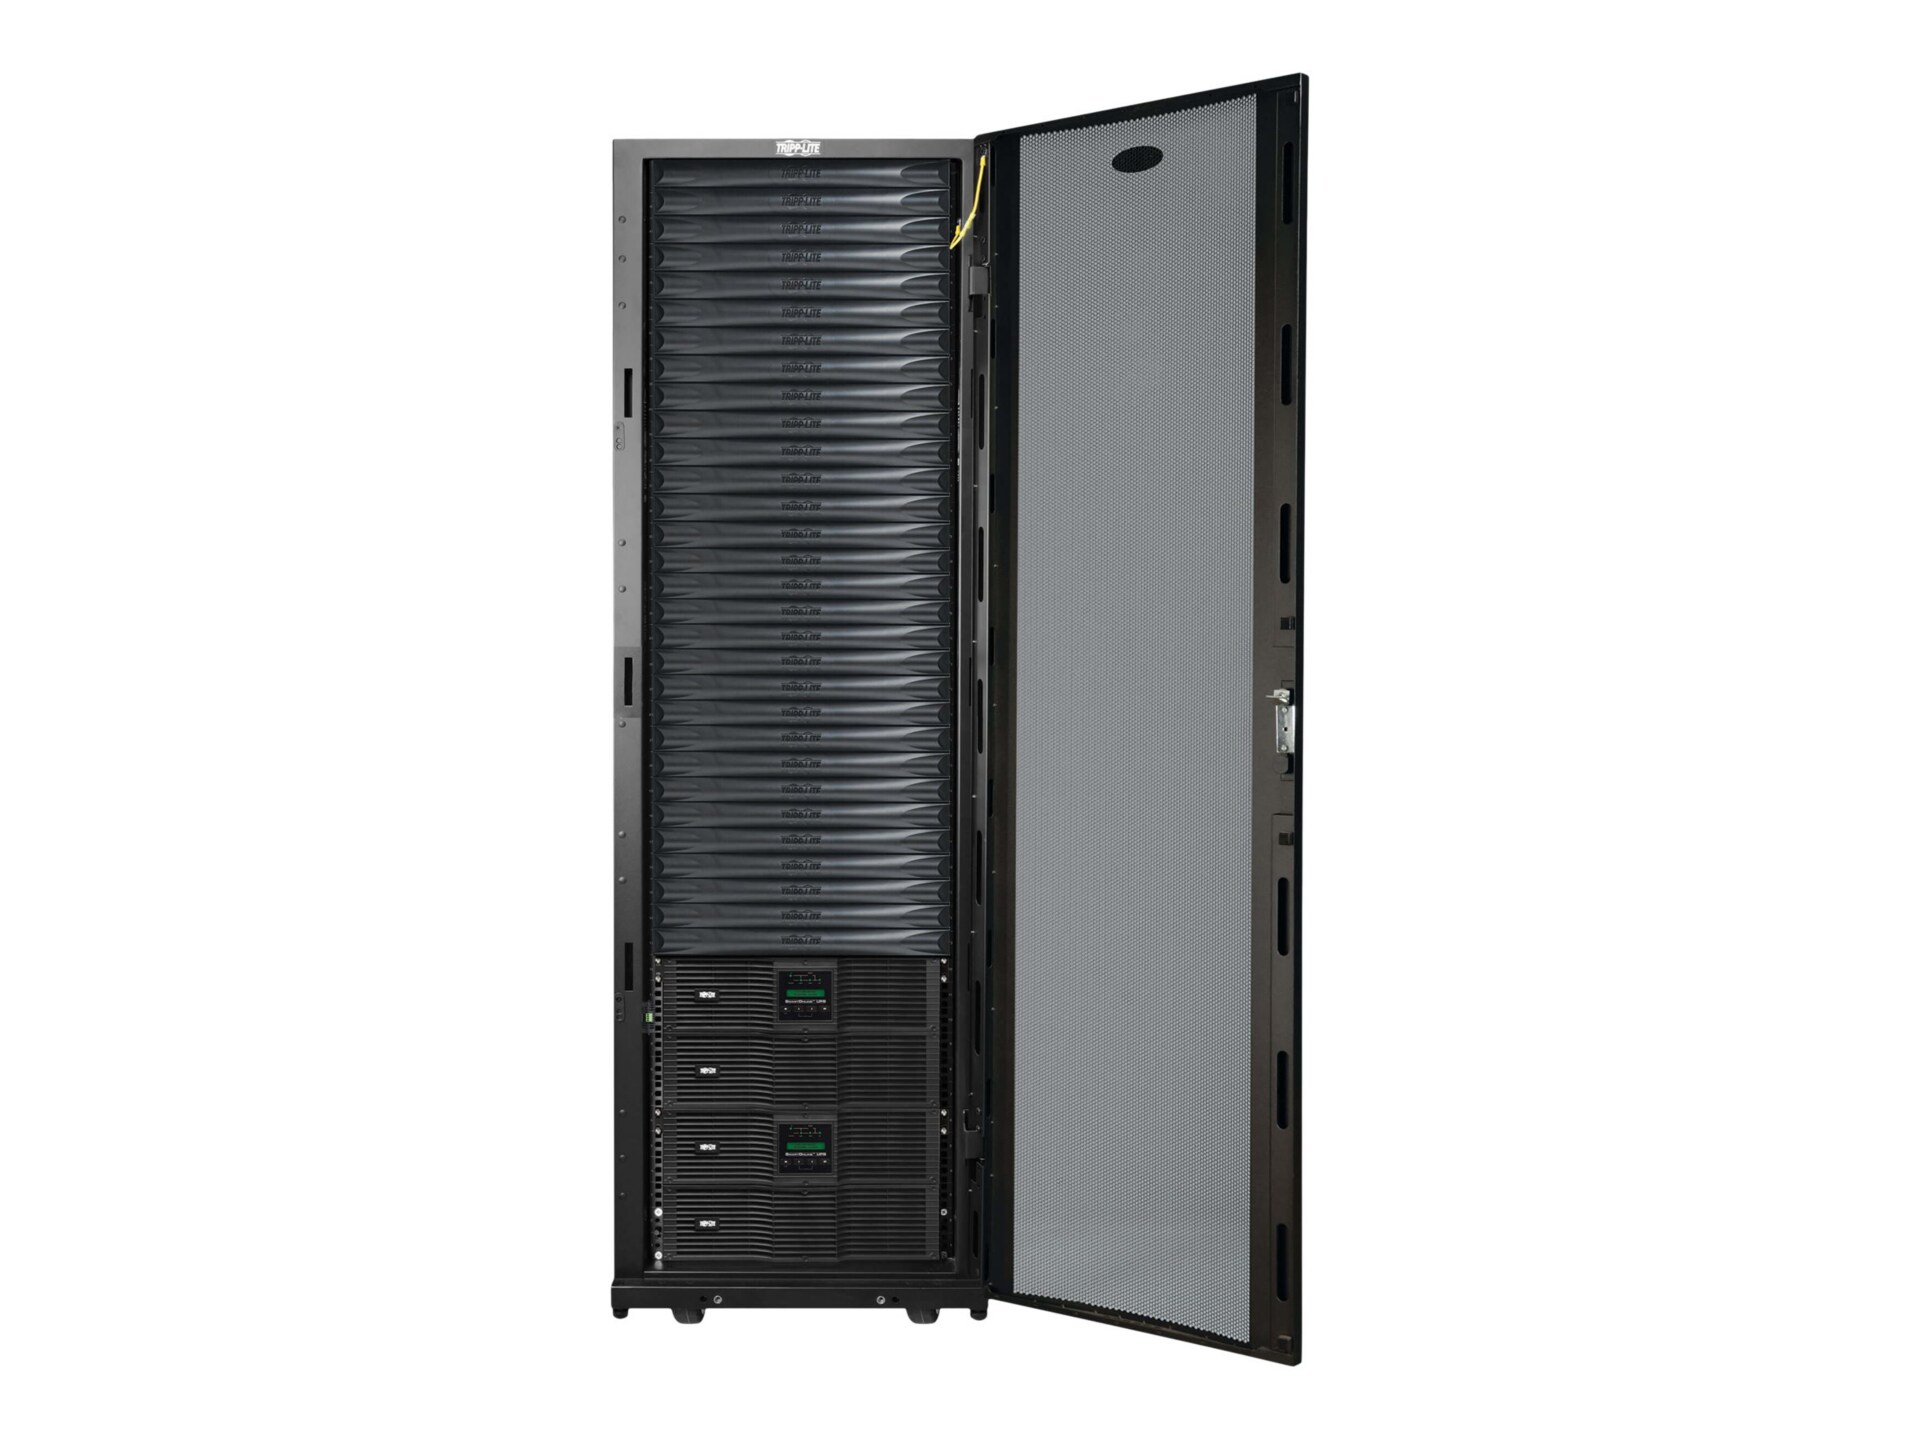 Tripp Lite EdgeReady Micro Data Center - 30U, (2) 10 kVA UPS Systems (N+N), Network Management and Dual PDUs, 208/240V